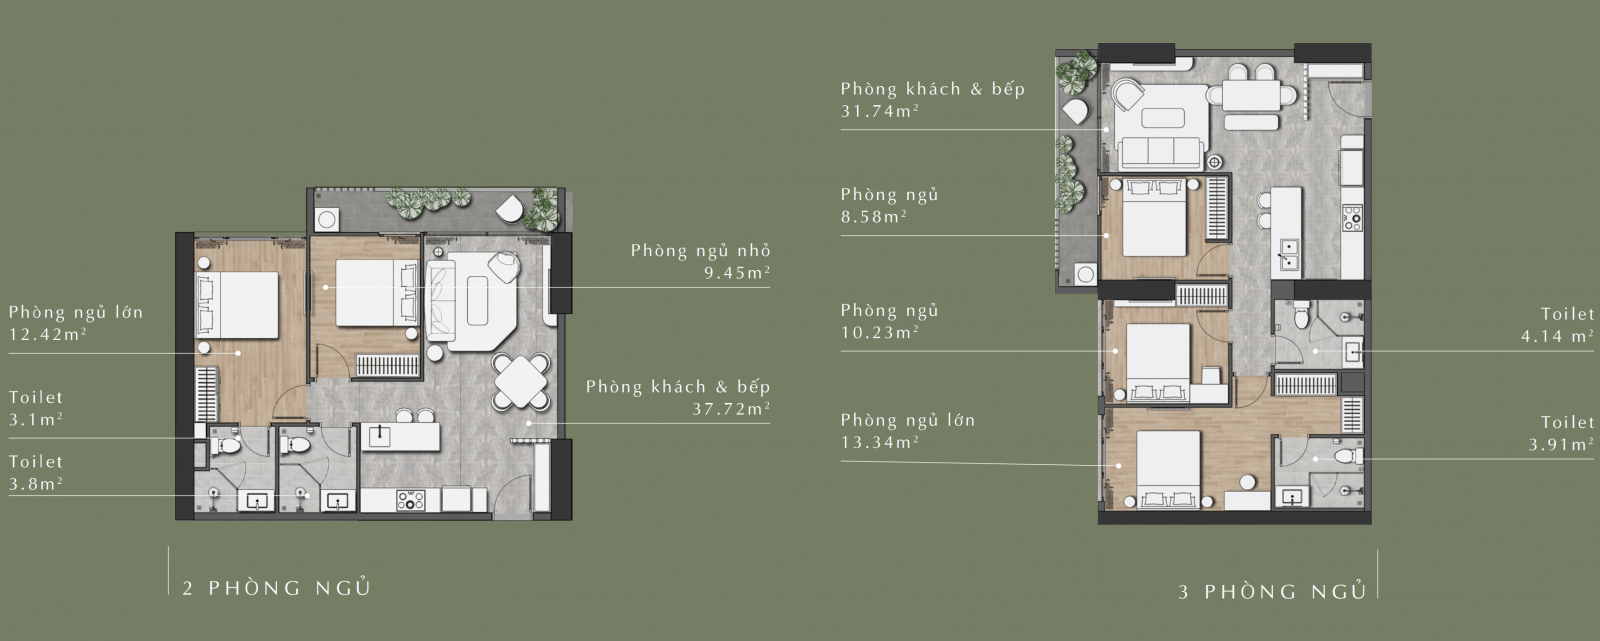 anderson park apartment layout